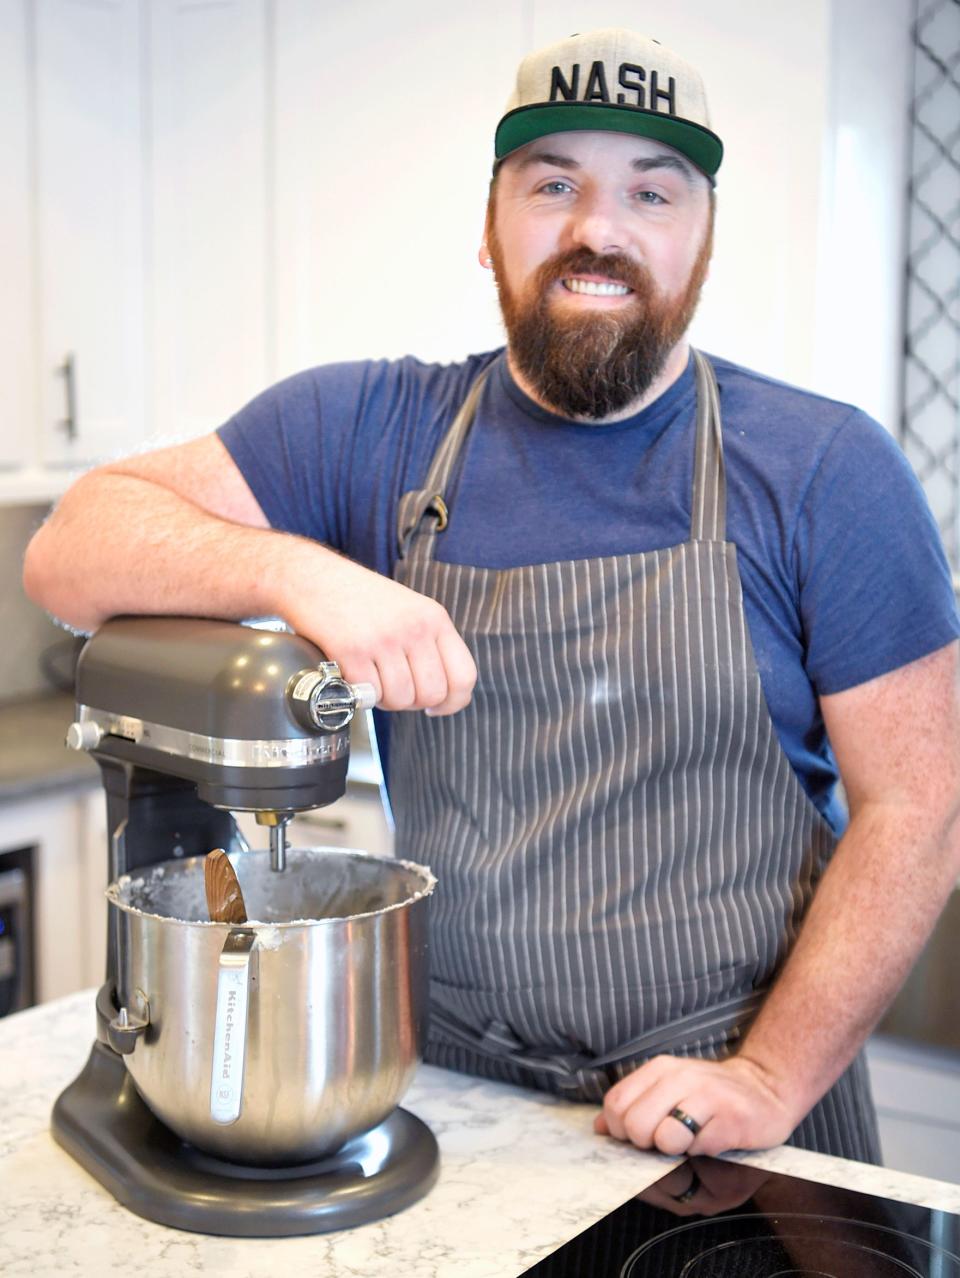 Signature Desserts co-owner and baker Nate Clingman decorates a cake for a customer in his Nolensville, Tennessee, home on Friday.